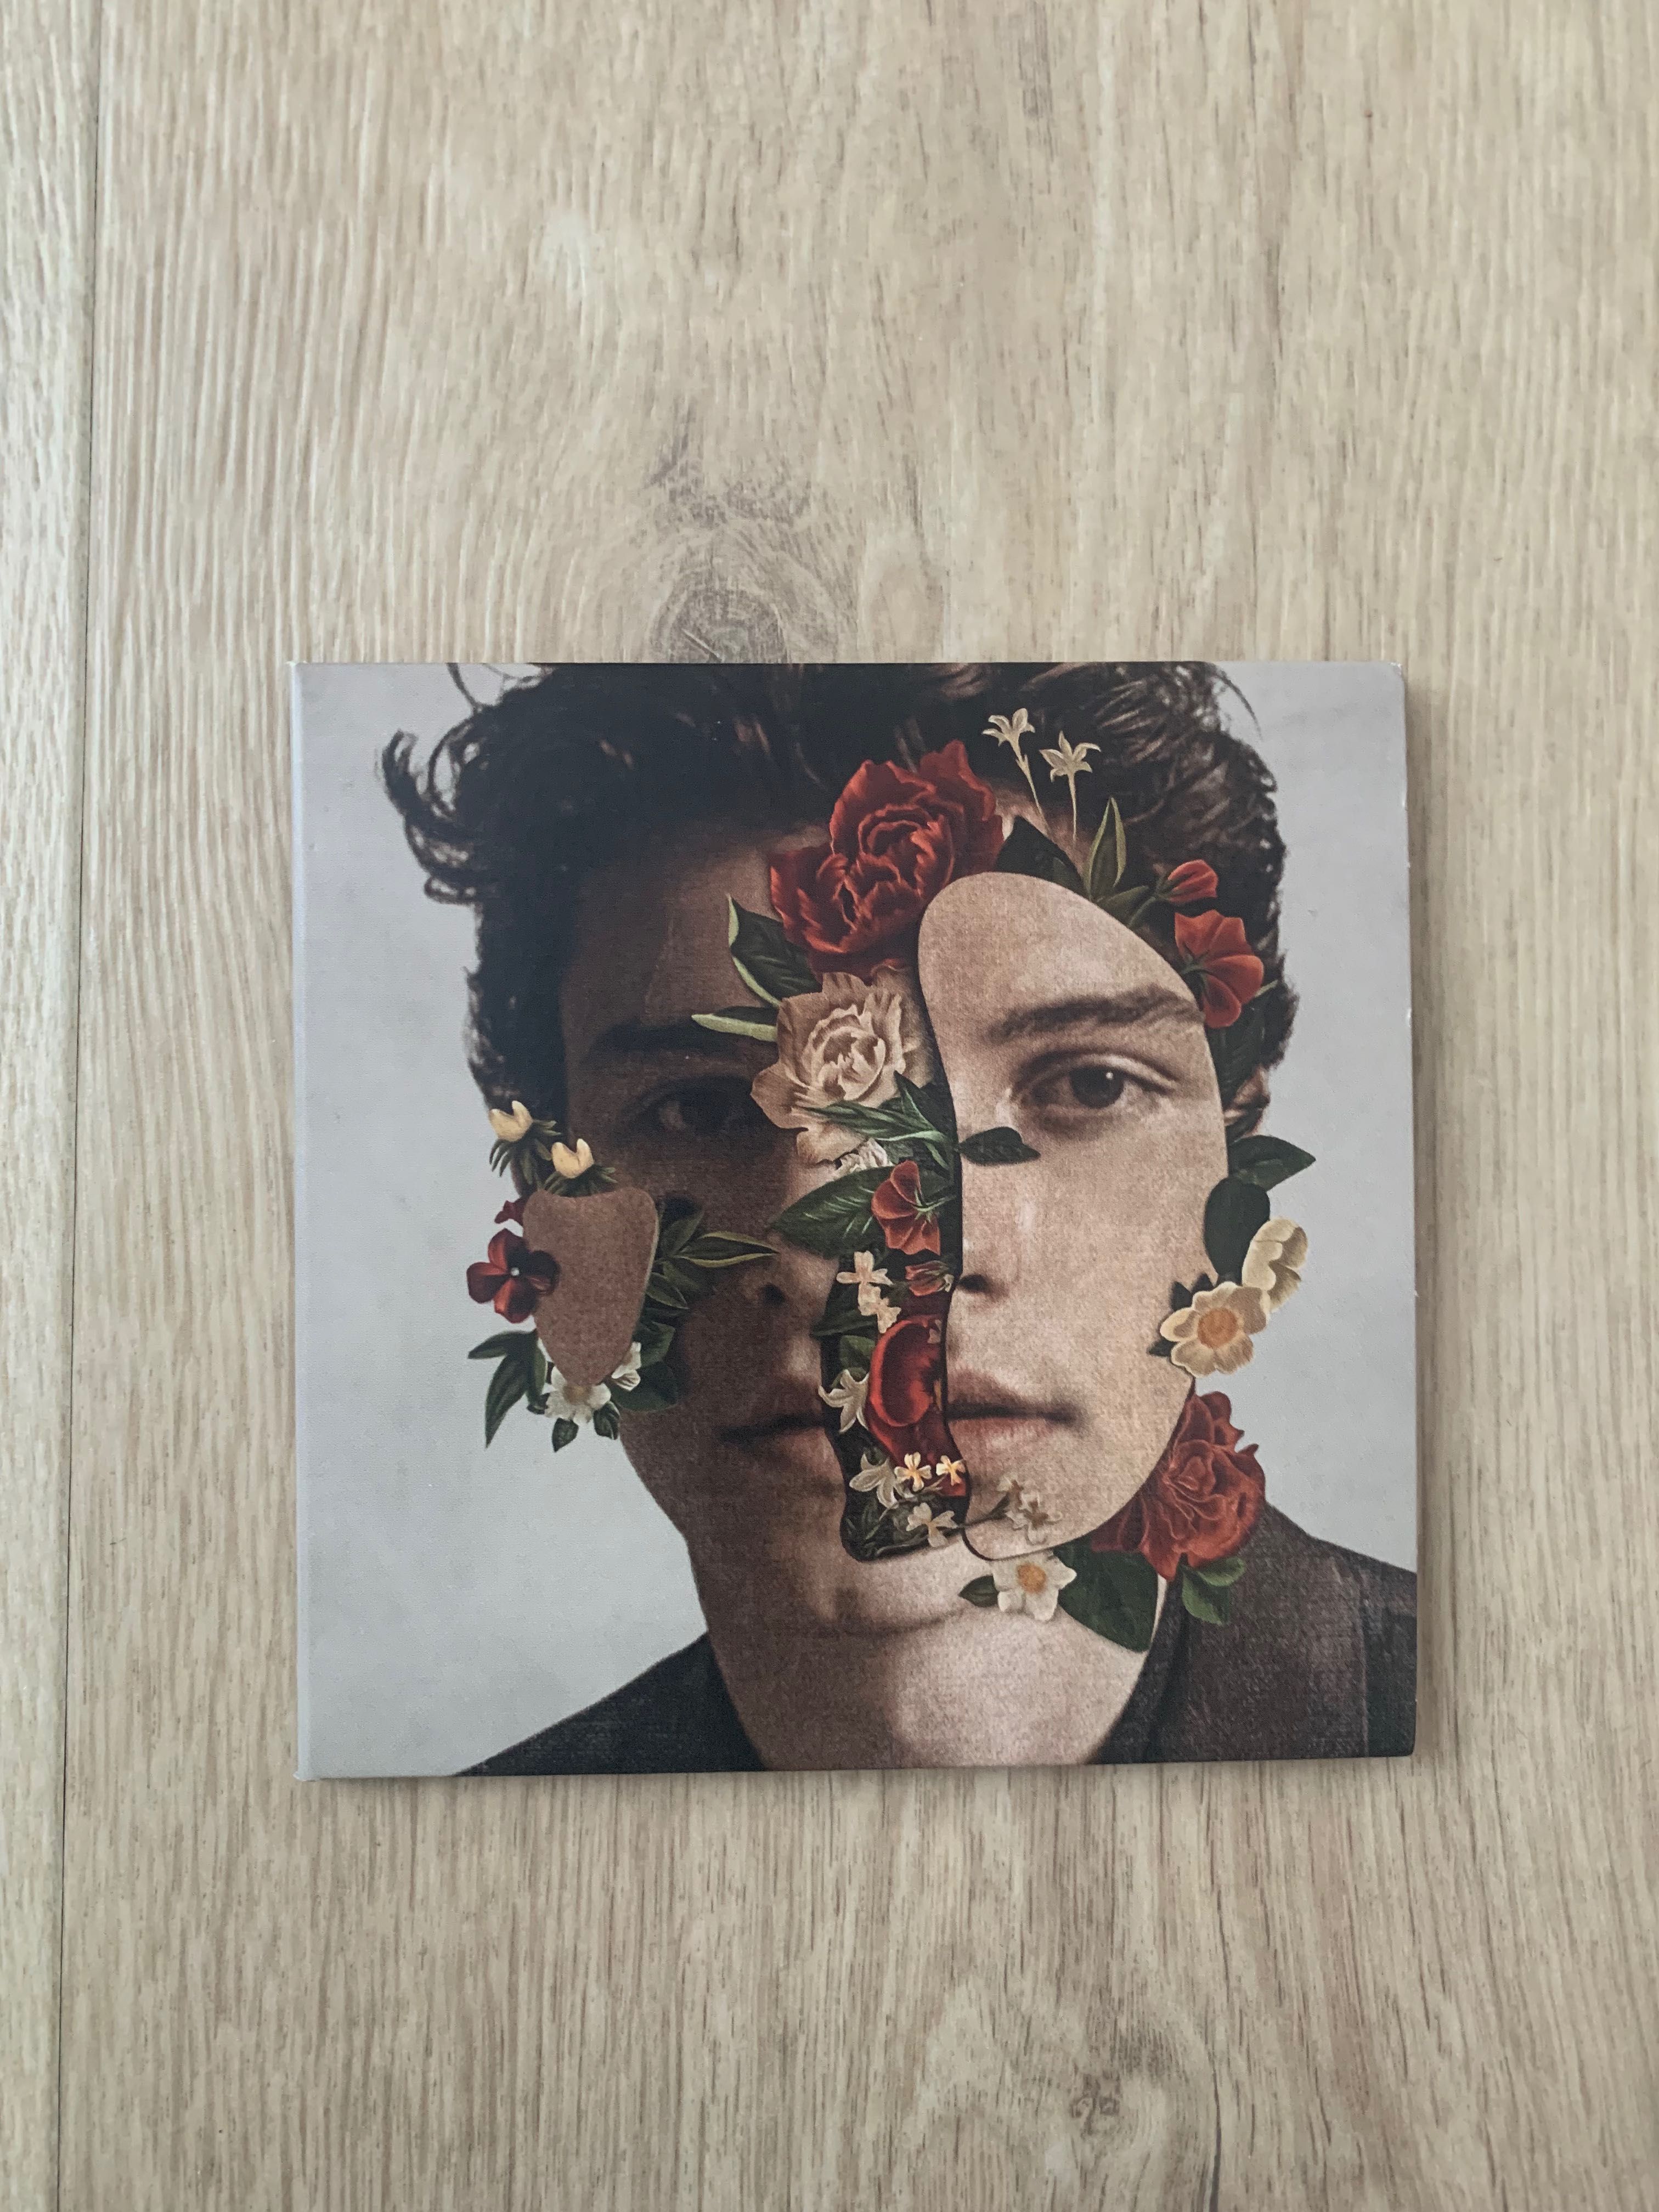 Shawn Mendes - Island (Deluxe Edition)